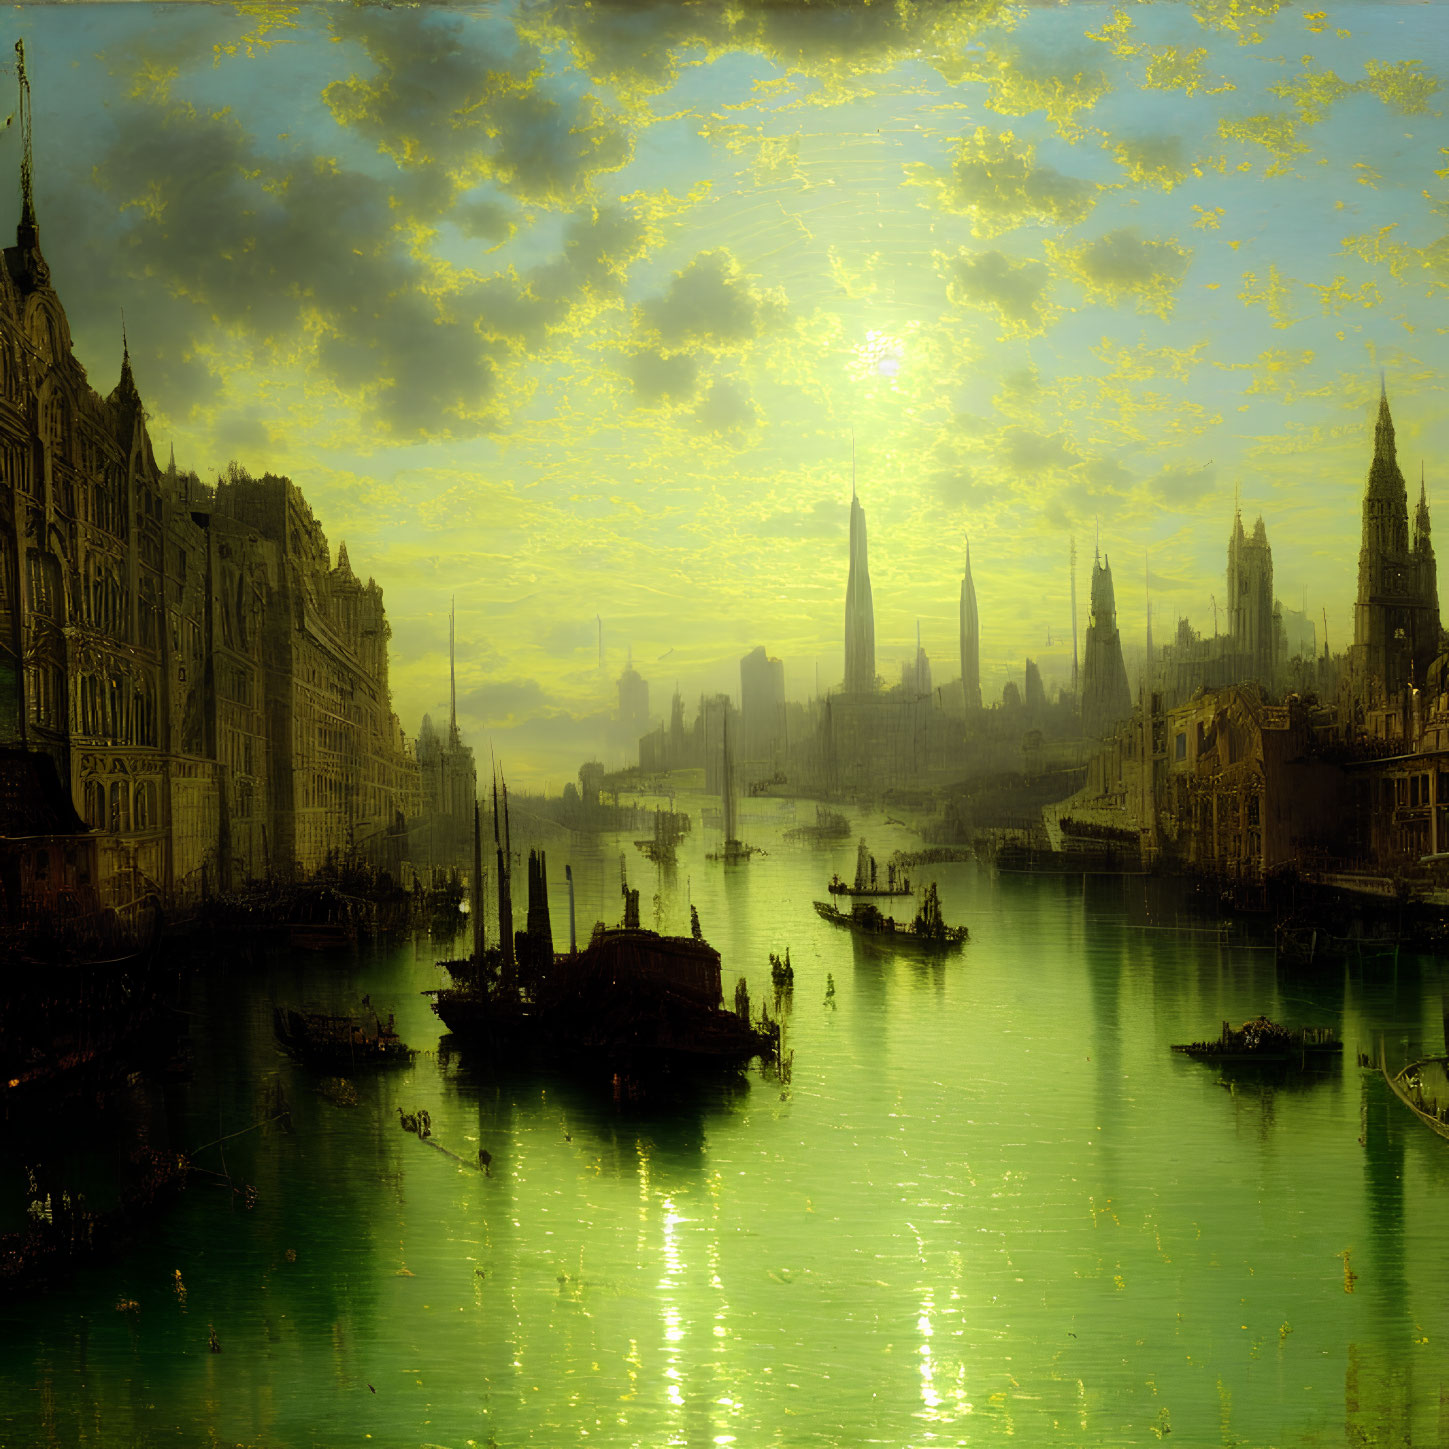 Victorian-era painting of serene cityscape with Gothic architecture and river boats